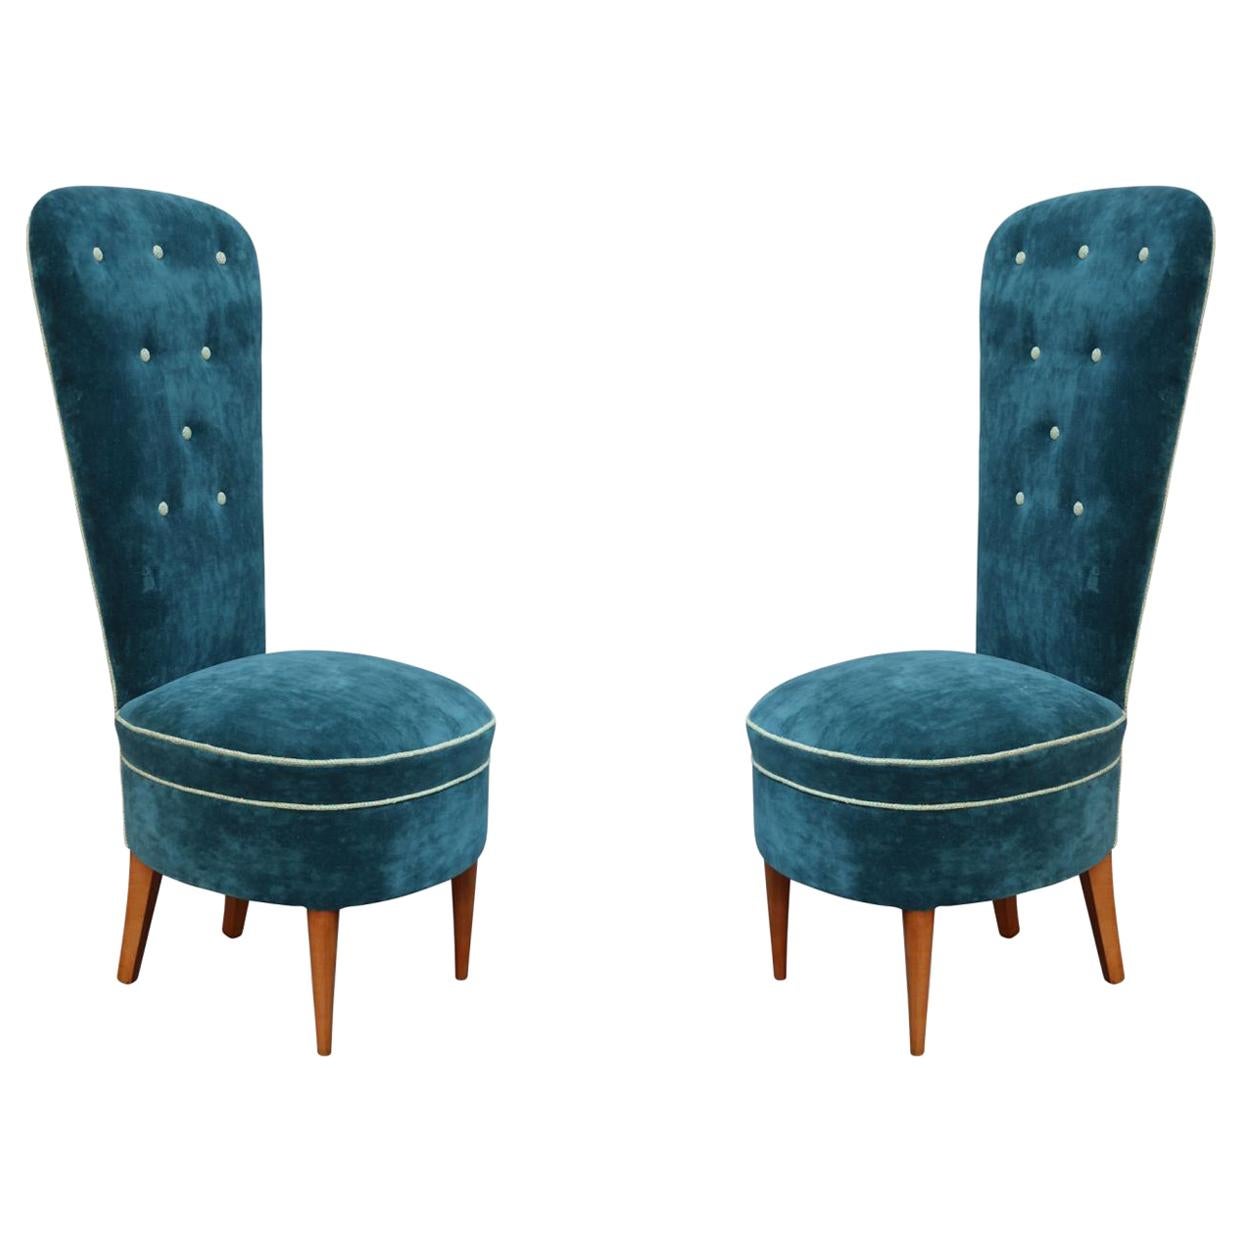 Pair of Blue Velvet and Wood Legs Midcentury Italian Lounge Chairs, 1950 For Sale